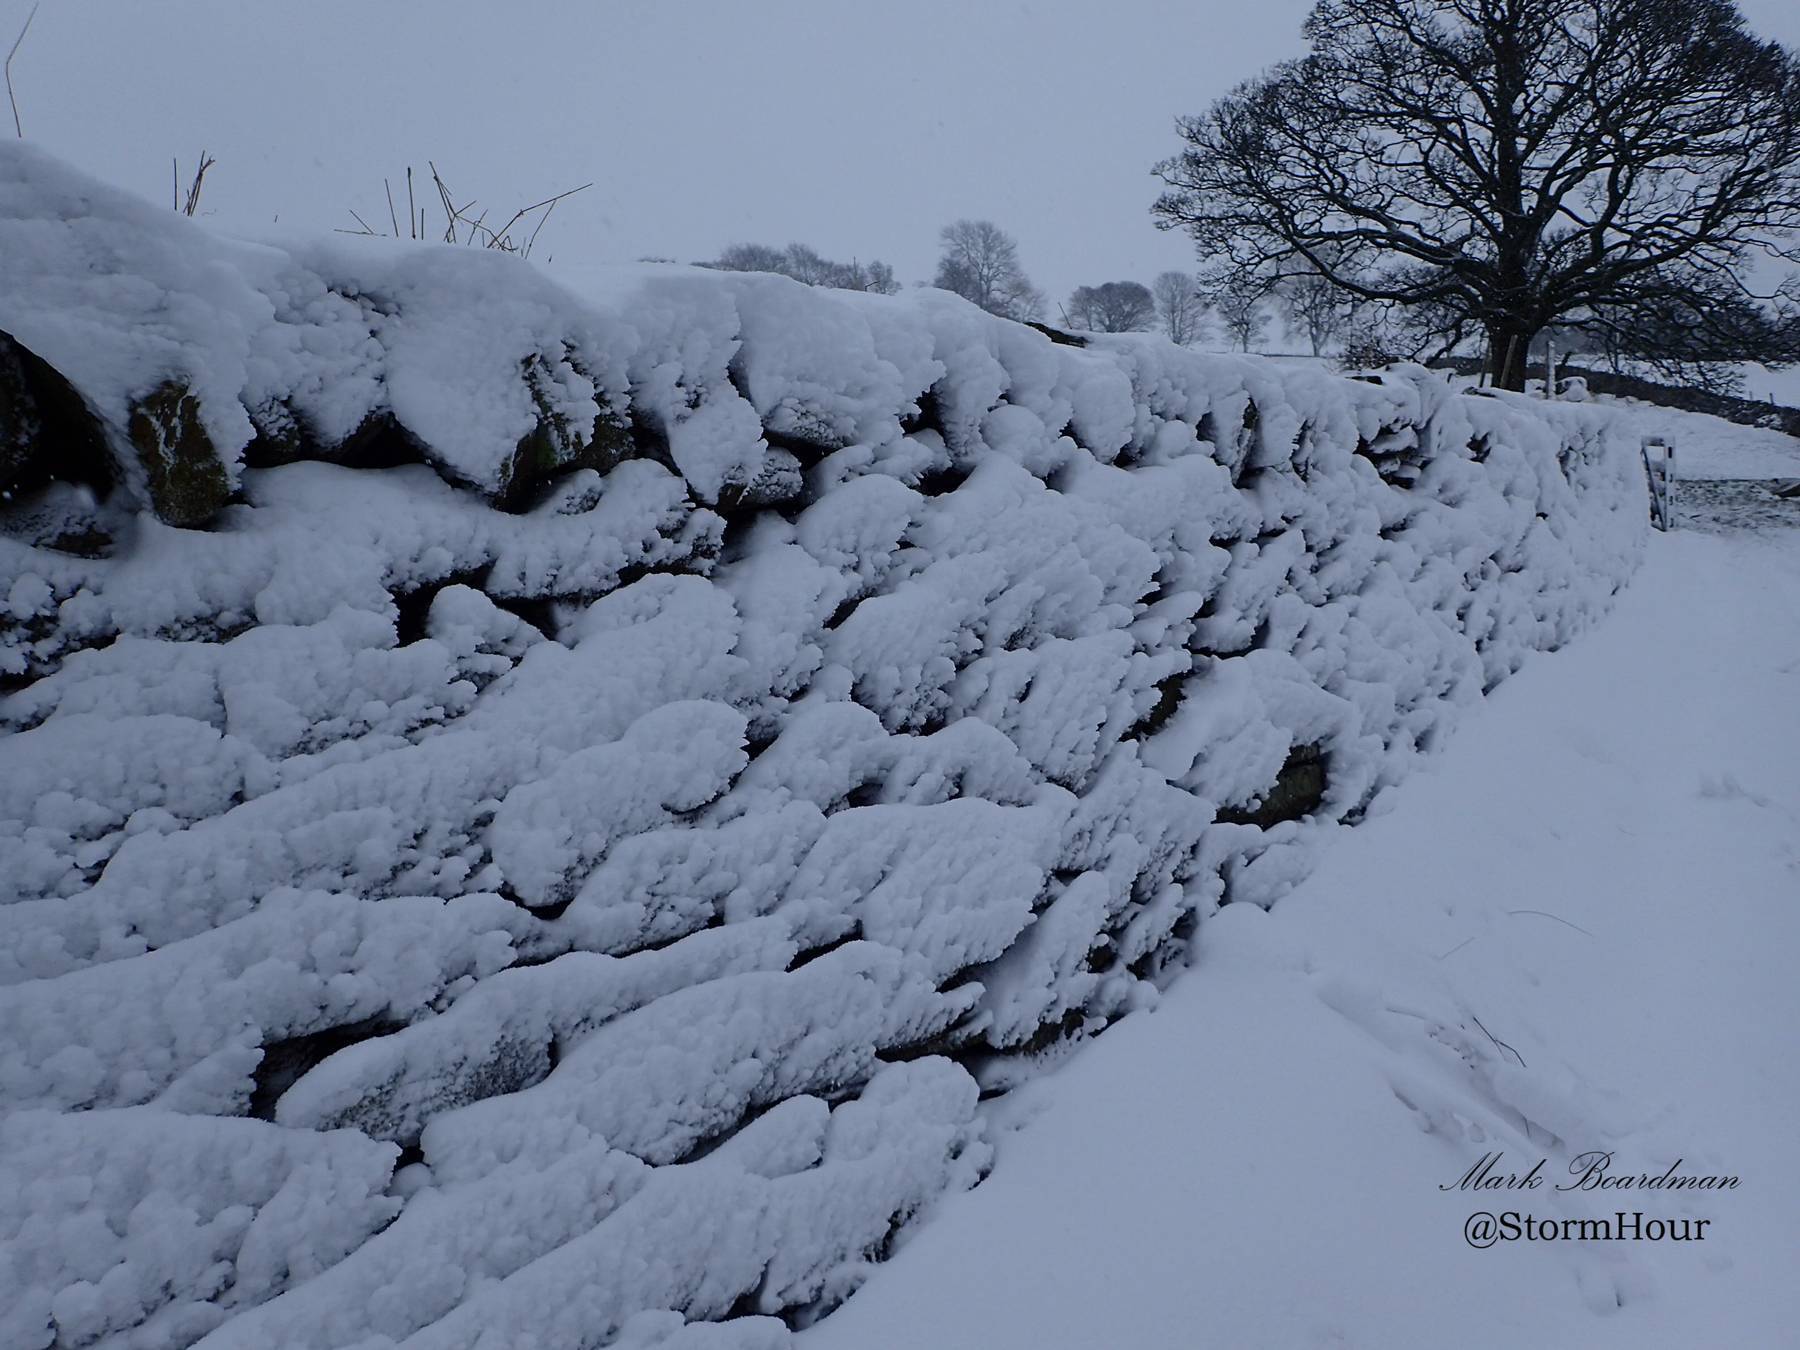 Snow on a dry stone wall in east Cheshire December 2017 by Mark Boardman @StormHour